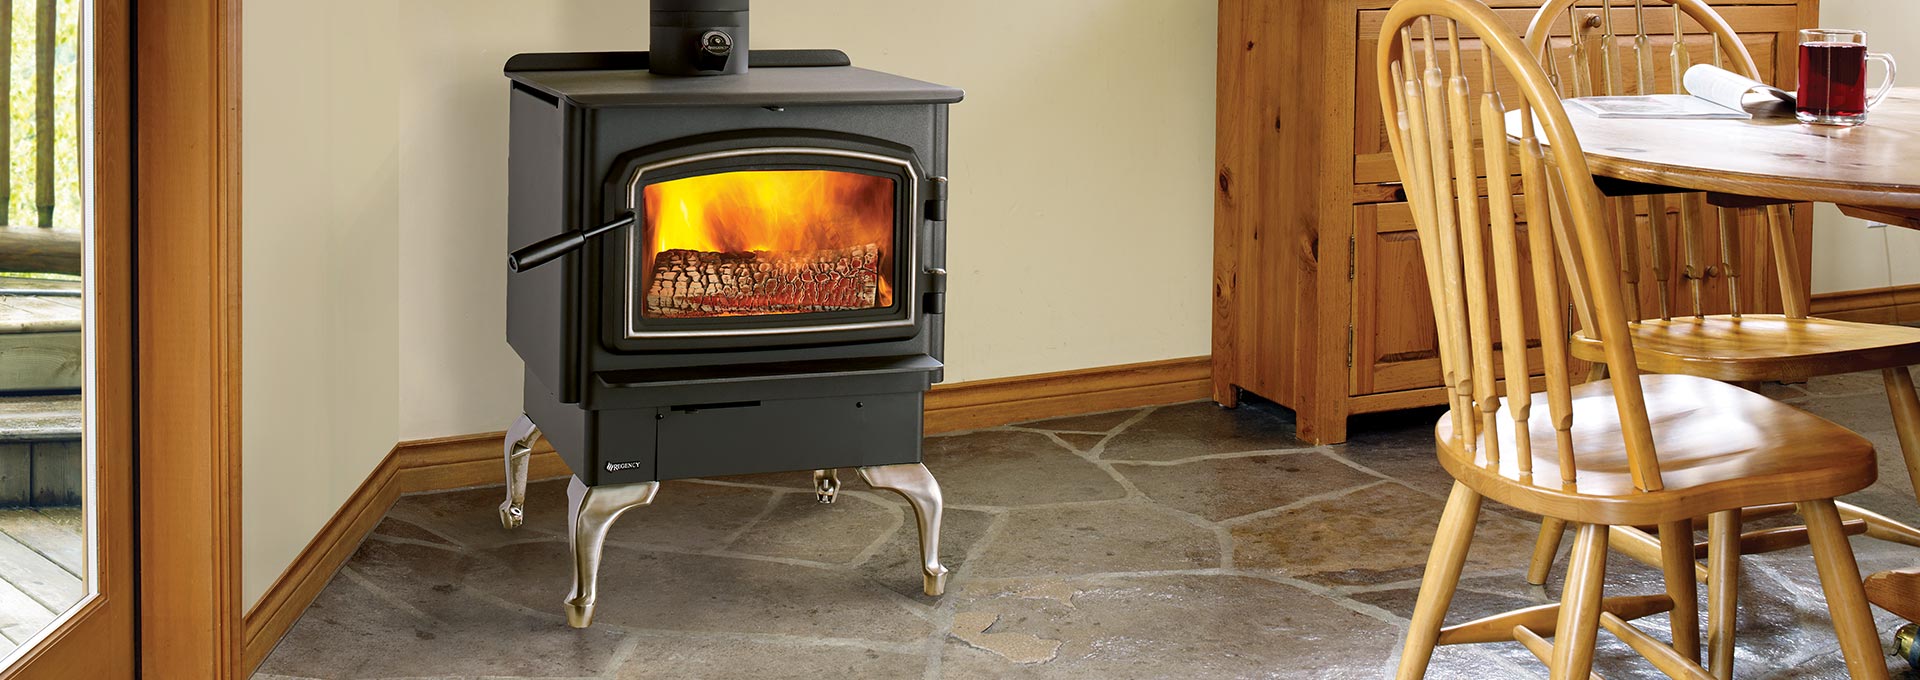 Install Wood Stove In Fireplace Fresh Wood Stoves